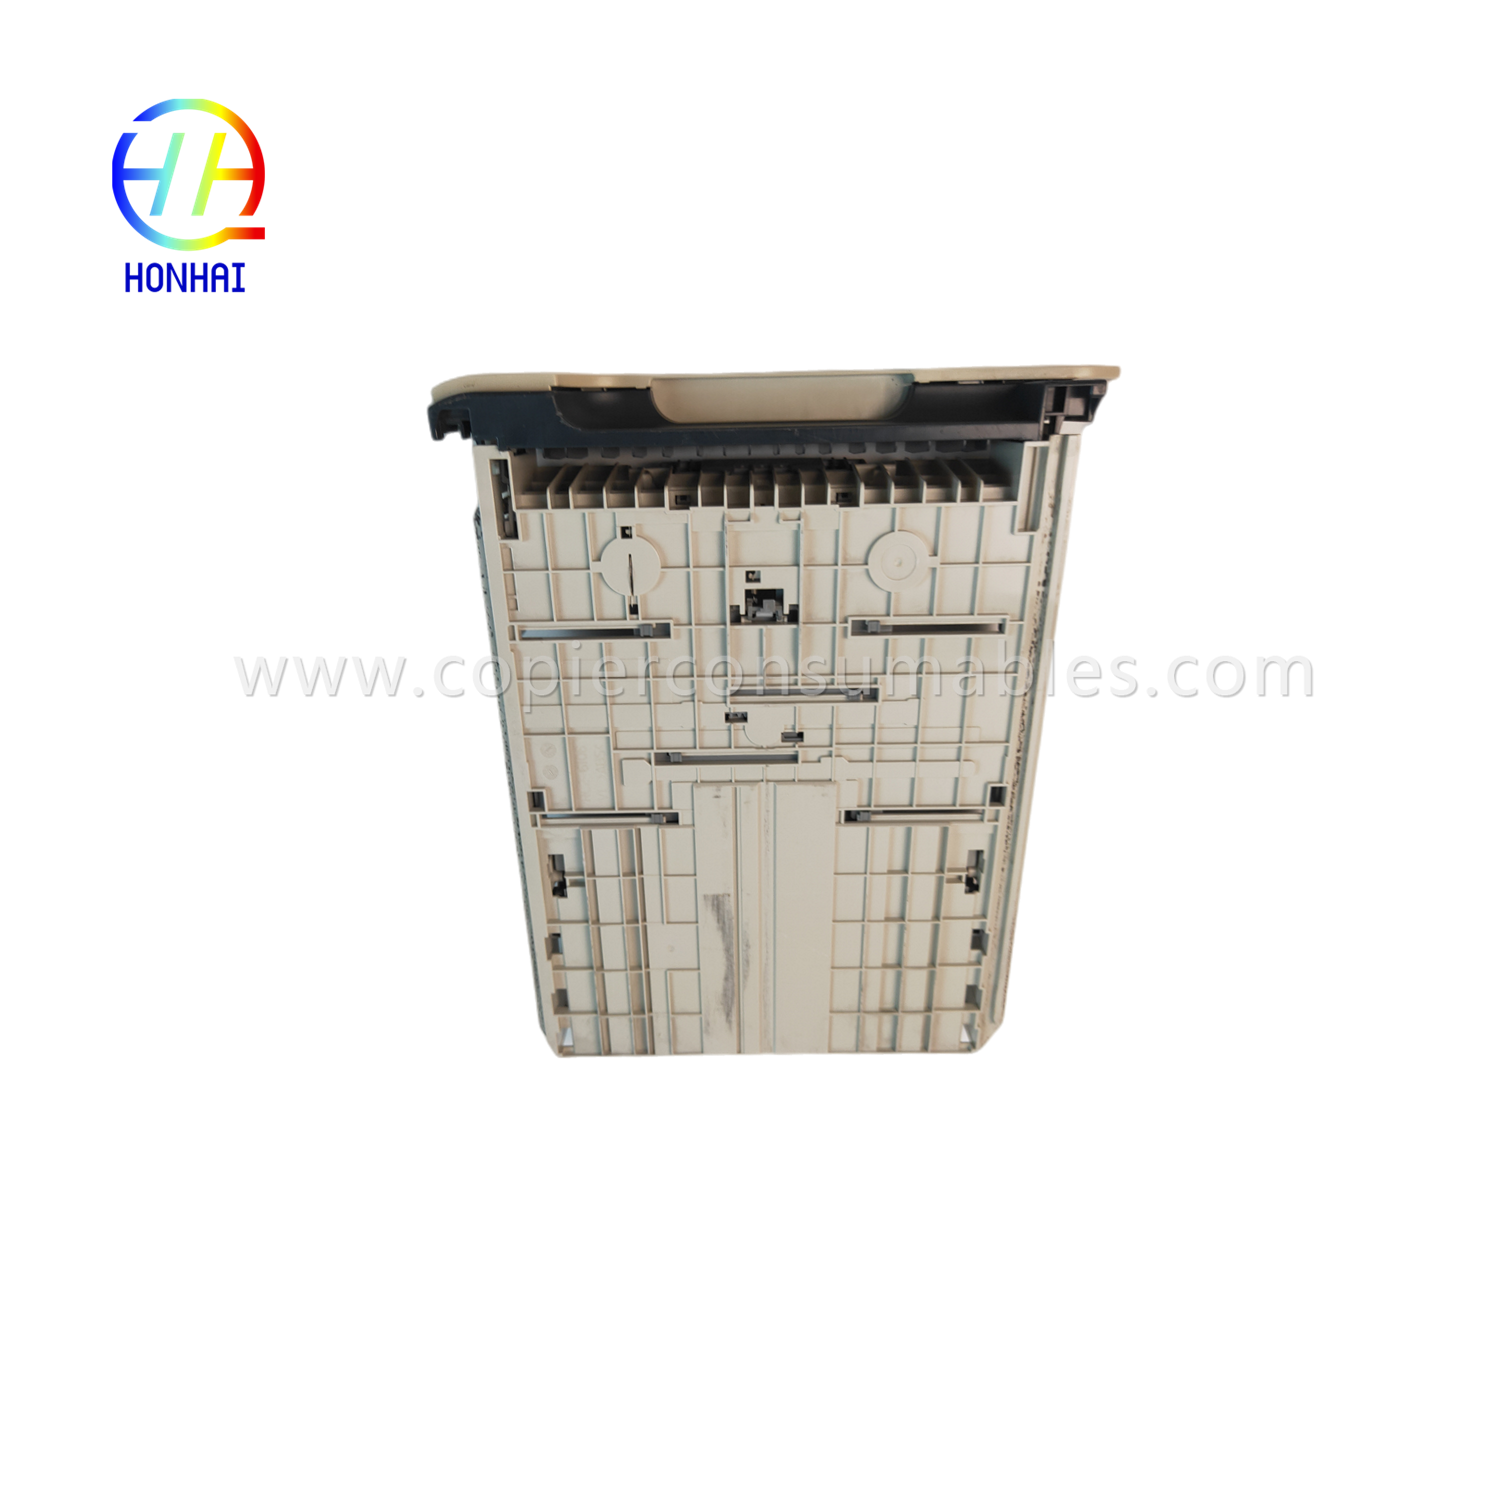 https://c585.goodao.net/paper-tray-for-hp-rc2-6106-rc2-6106-p2035-p2055-printers-product/